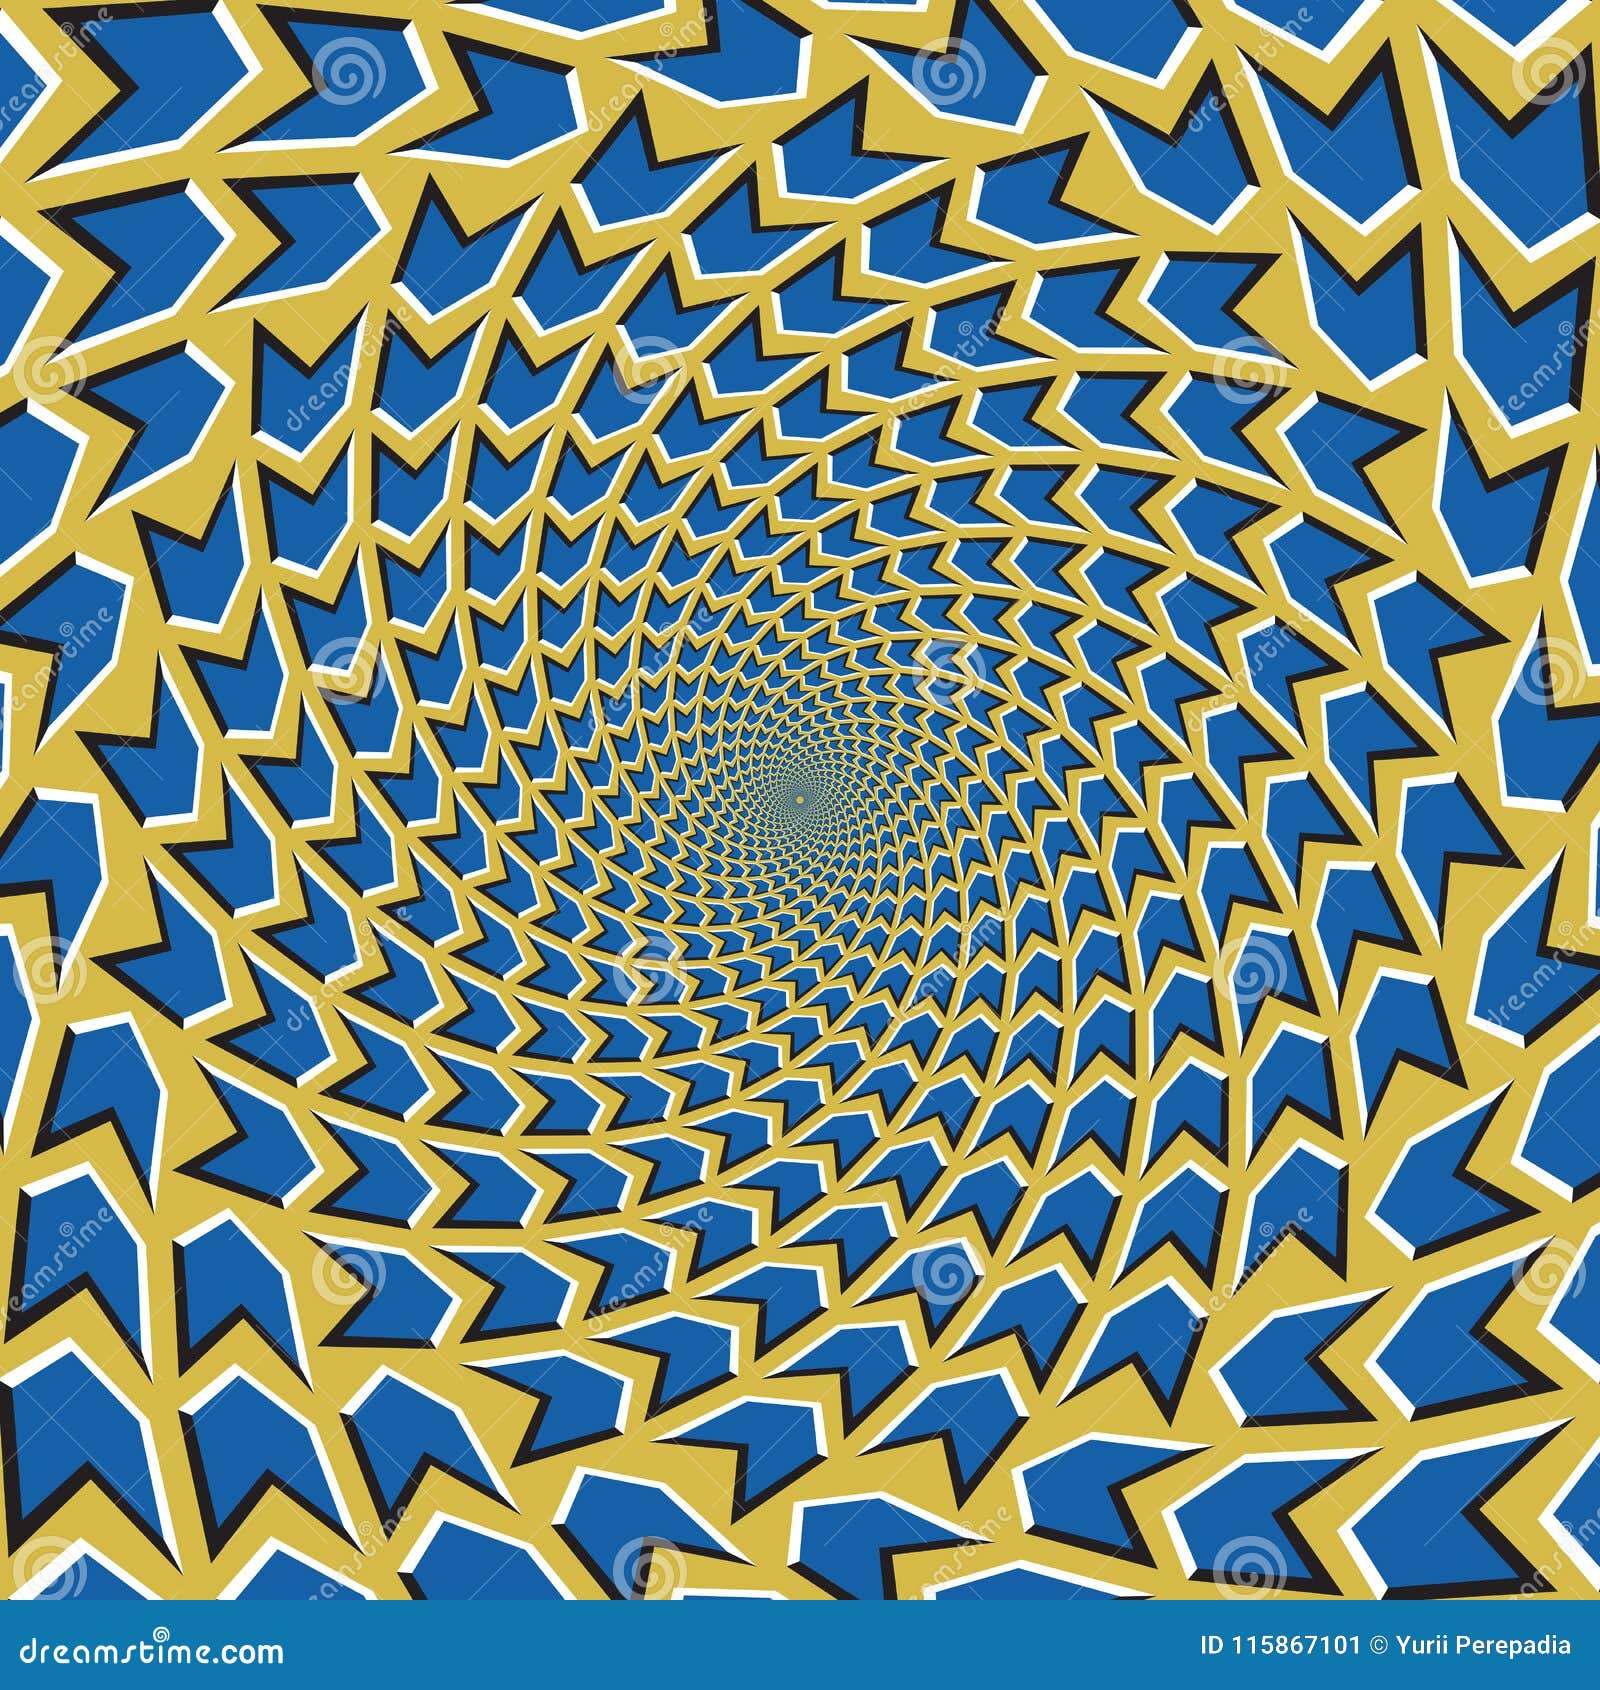 Optical Motion Illusion Vector Background. Blue Arrows Flock Together ...